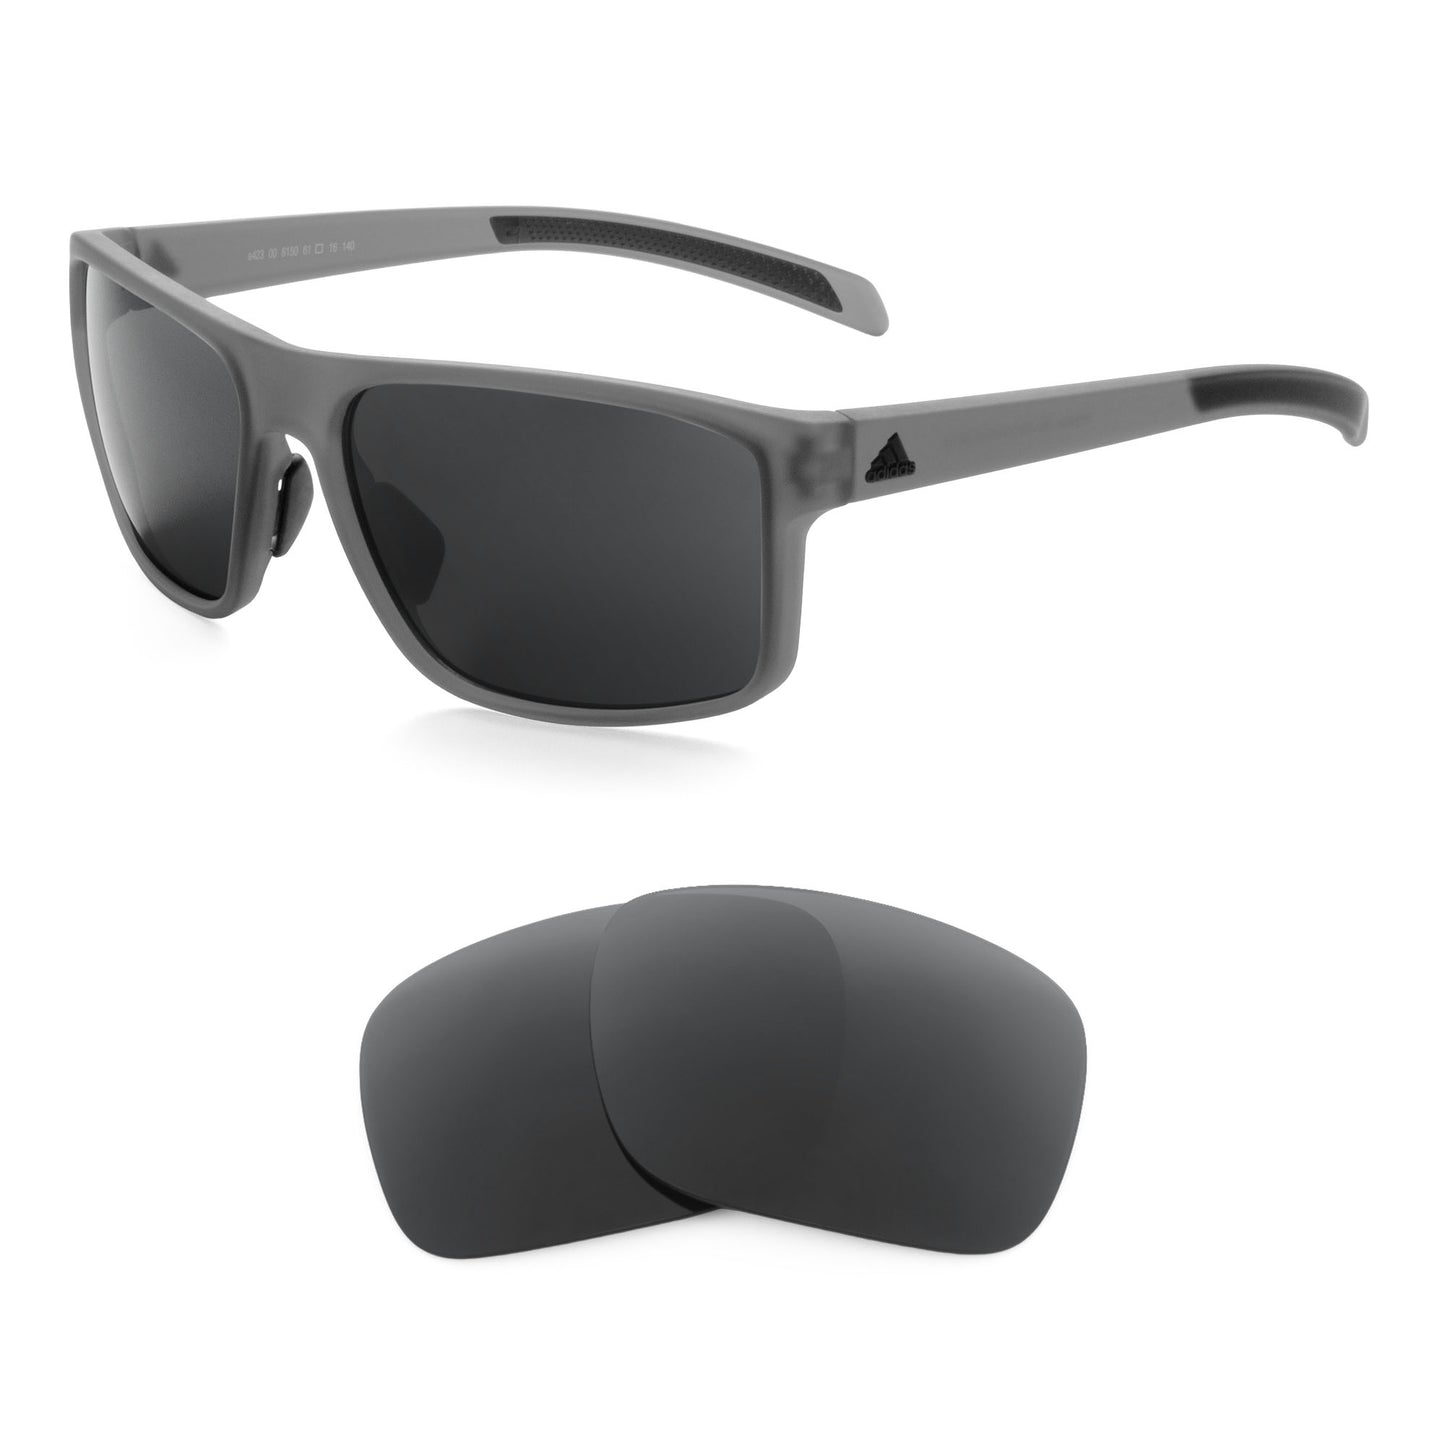 Adidas Whipstart sunglasses with replacement lenses